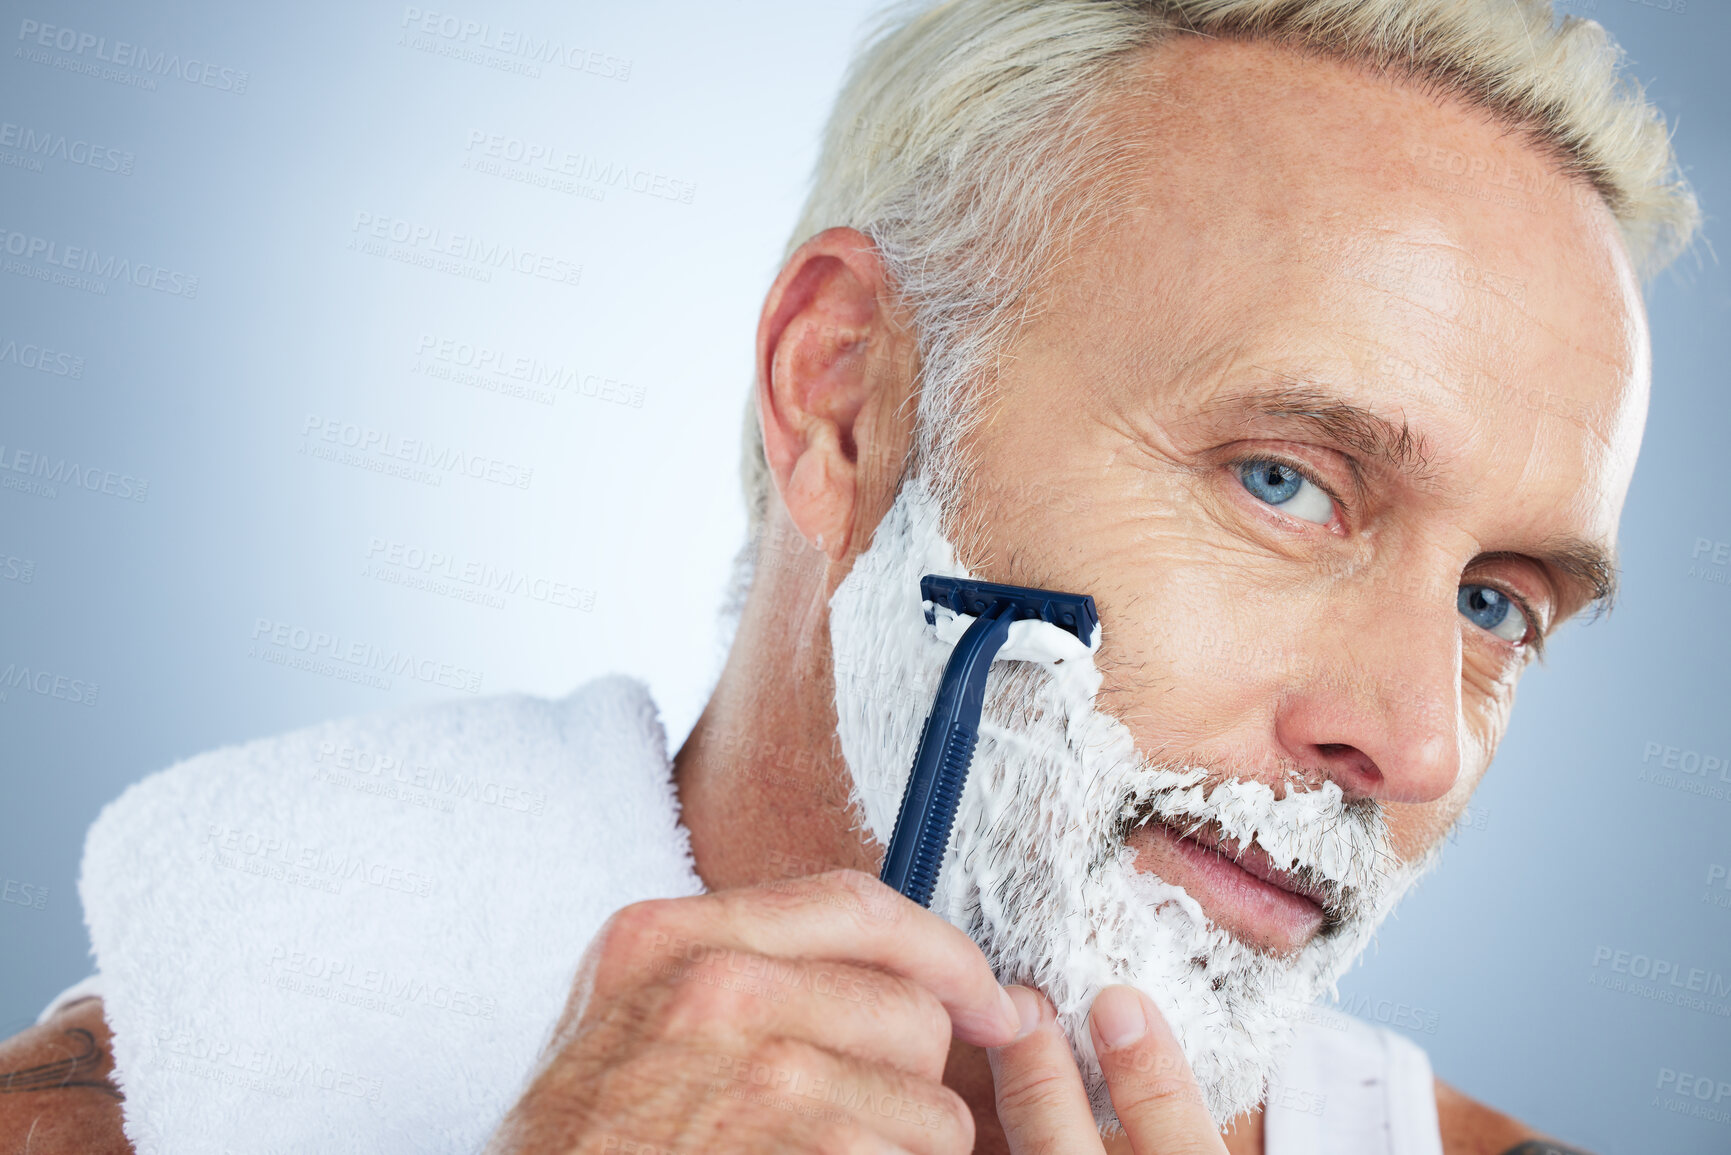 Buy stock photo Senior man, face and razor for shaving, skincare or grooming beard and hair removal against a studio background. Portrait of mature male with shaver, cream or foam cosmetics for facial treatment